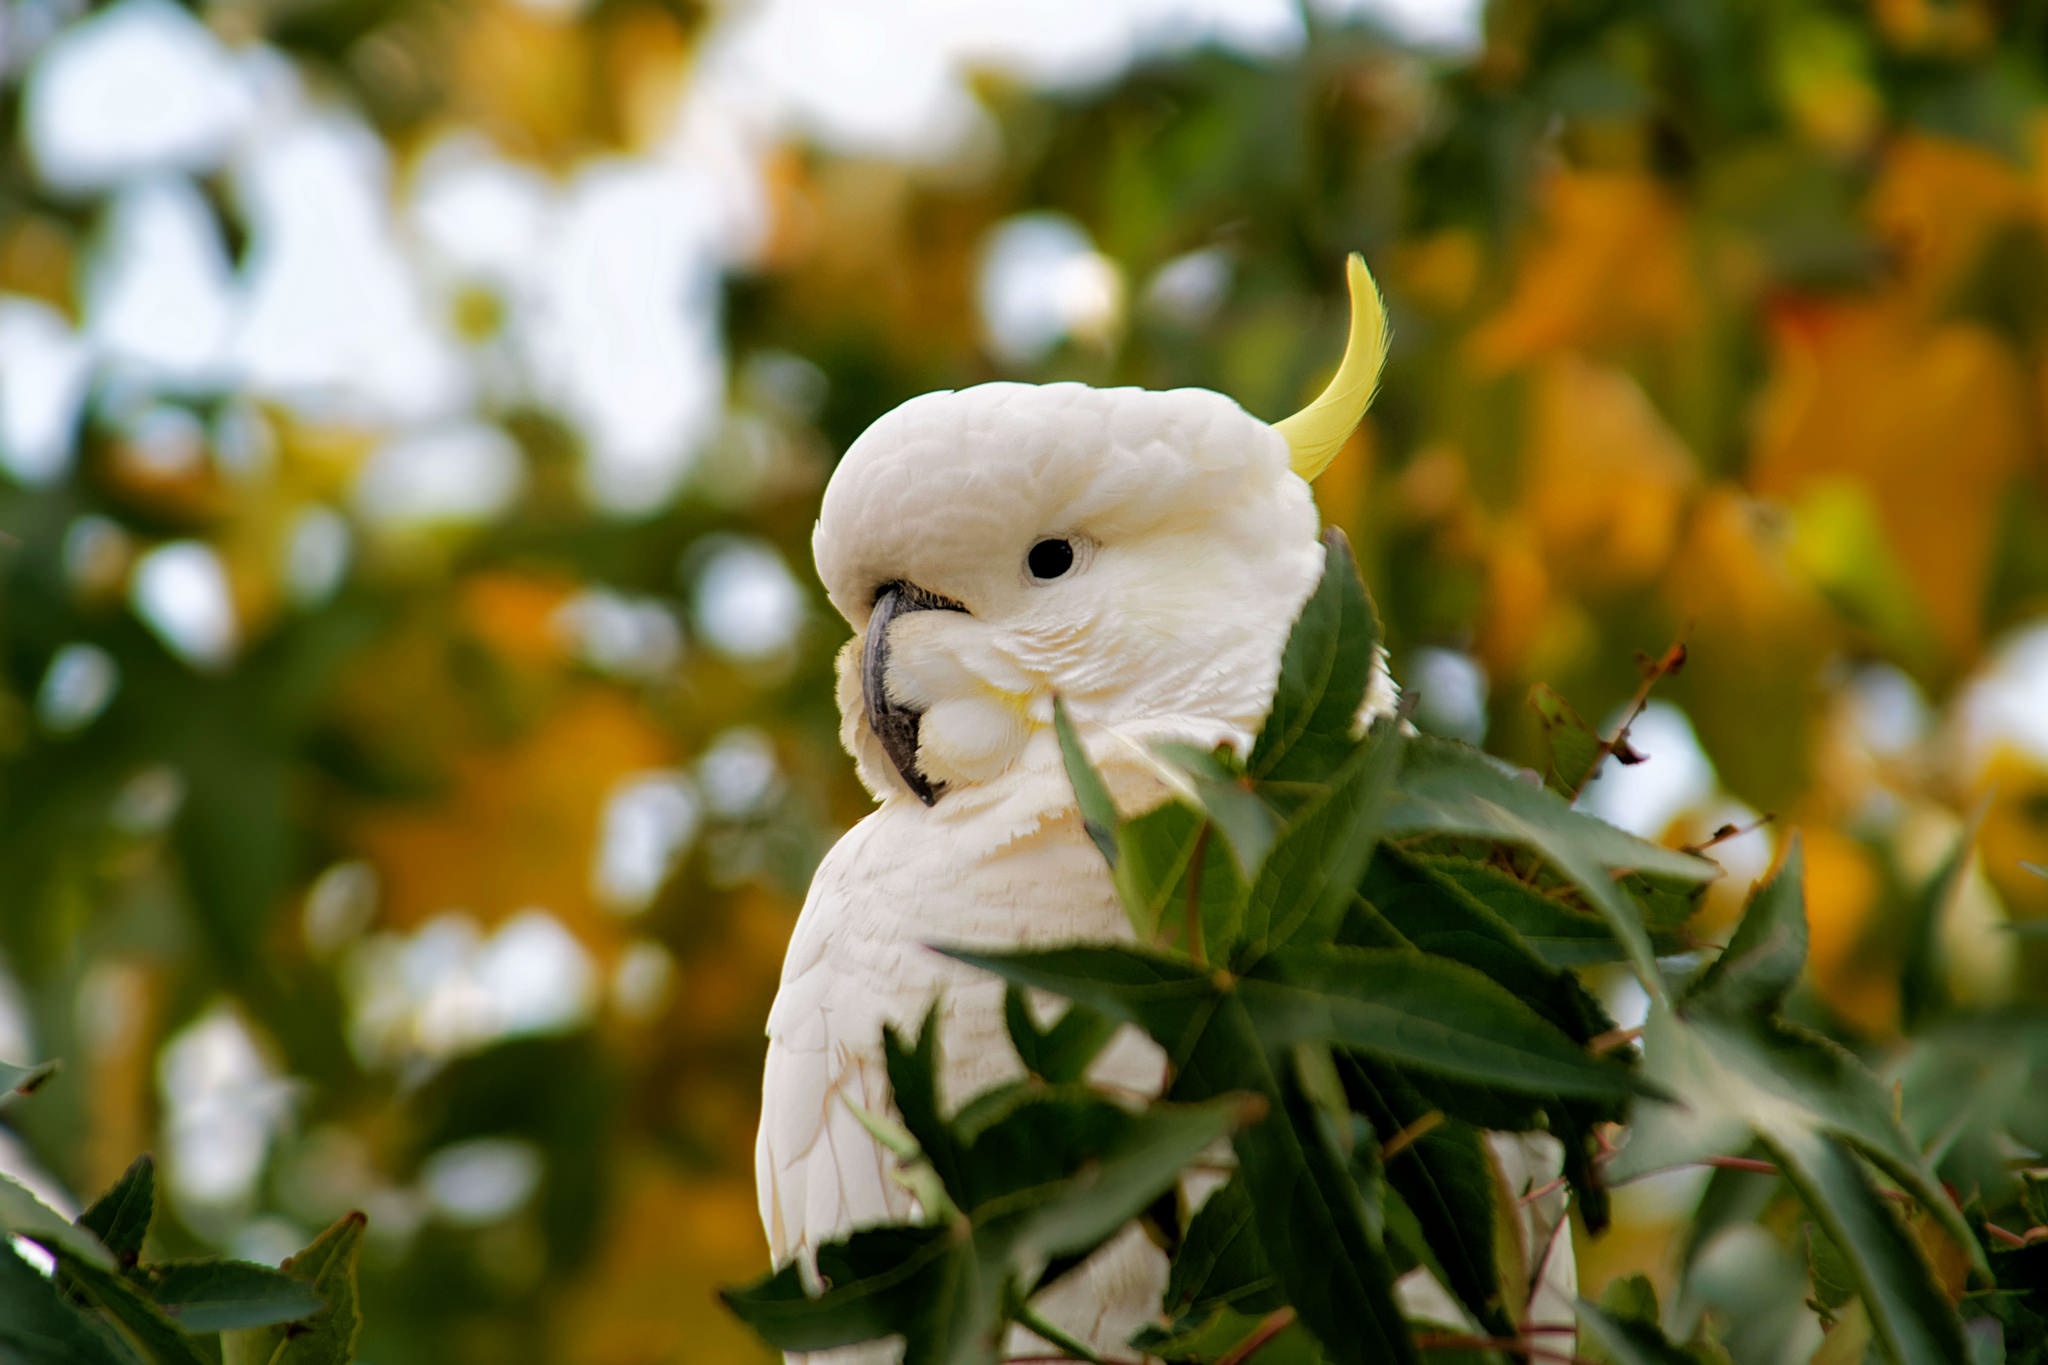 Cockatoo: Sulphur Crested Species From Wooded Habitats In Australia And New Guinea. 2050x1370 HD Wallpaper.